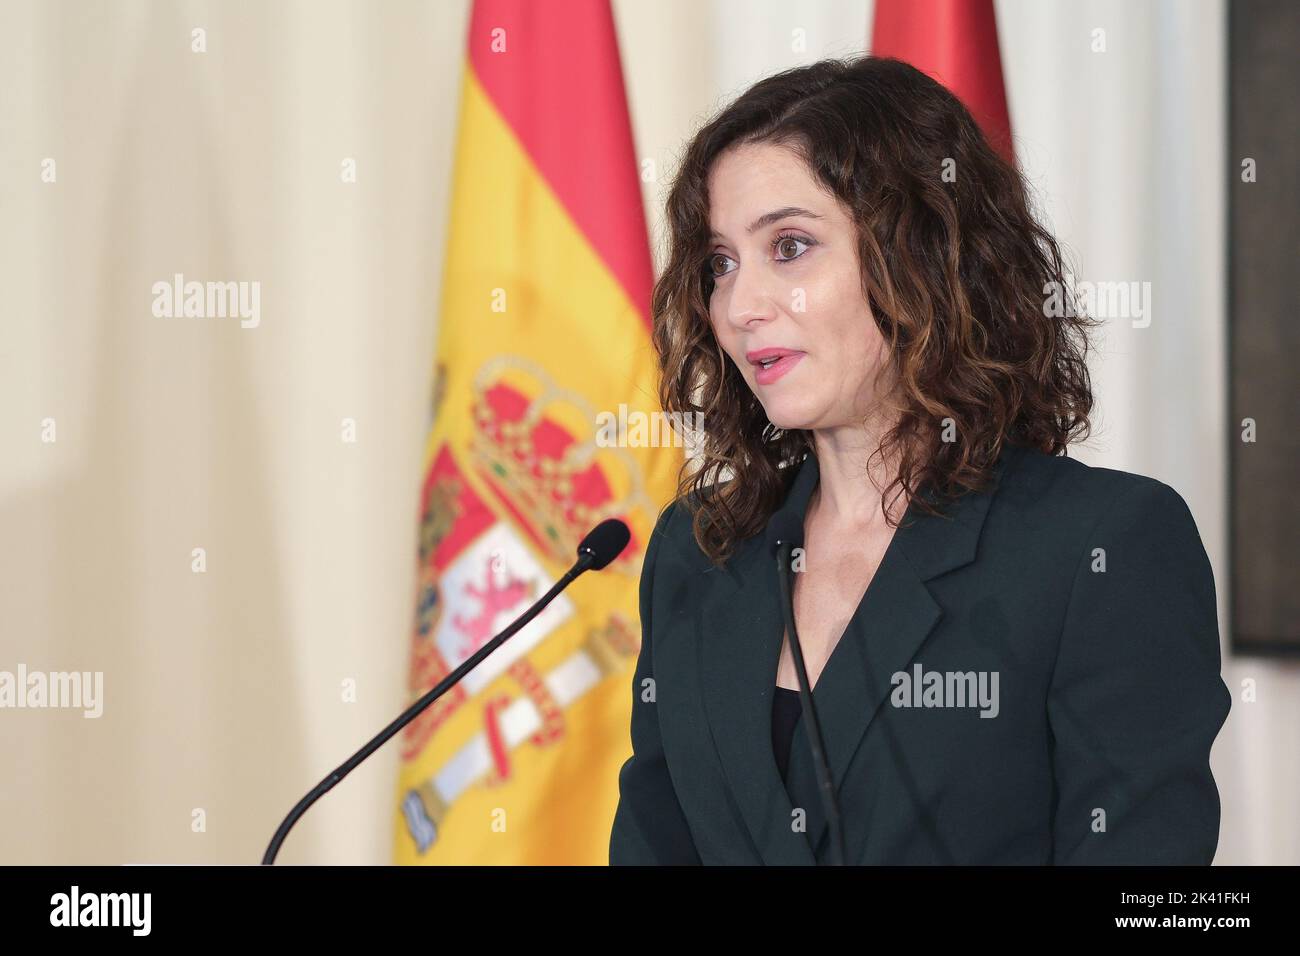 The president of the Community of Madrid, Isabel Diaz Ayuso seen during the presentation of the institutional portrait of Cifuentes at the Real Casa de Correos, in Madrid. Stock Photo